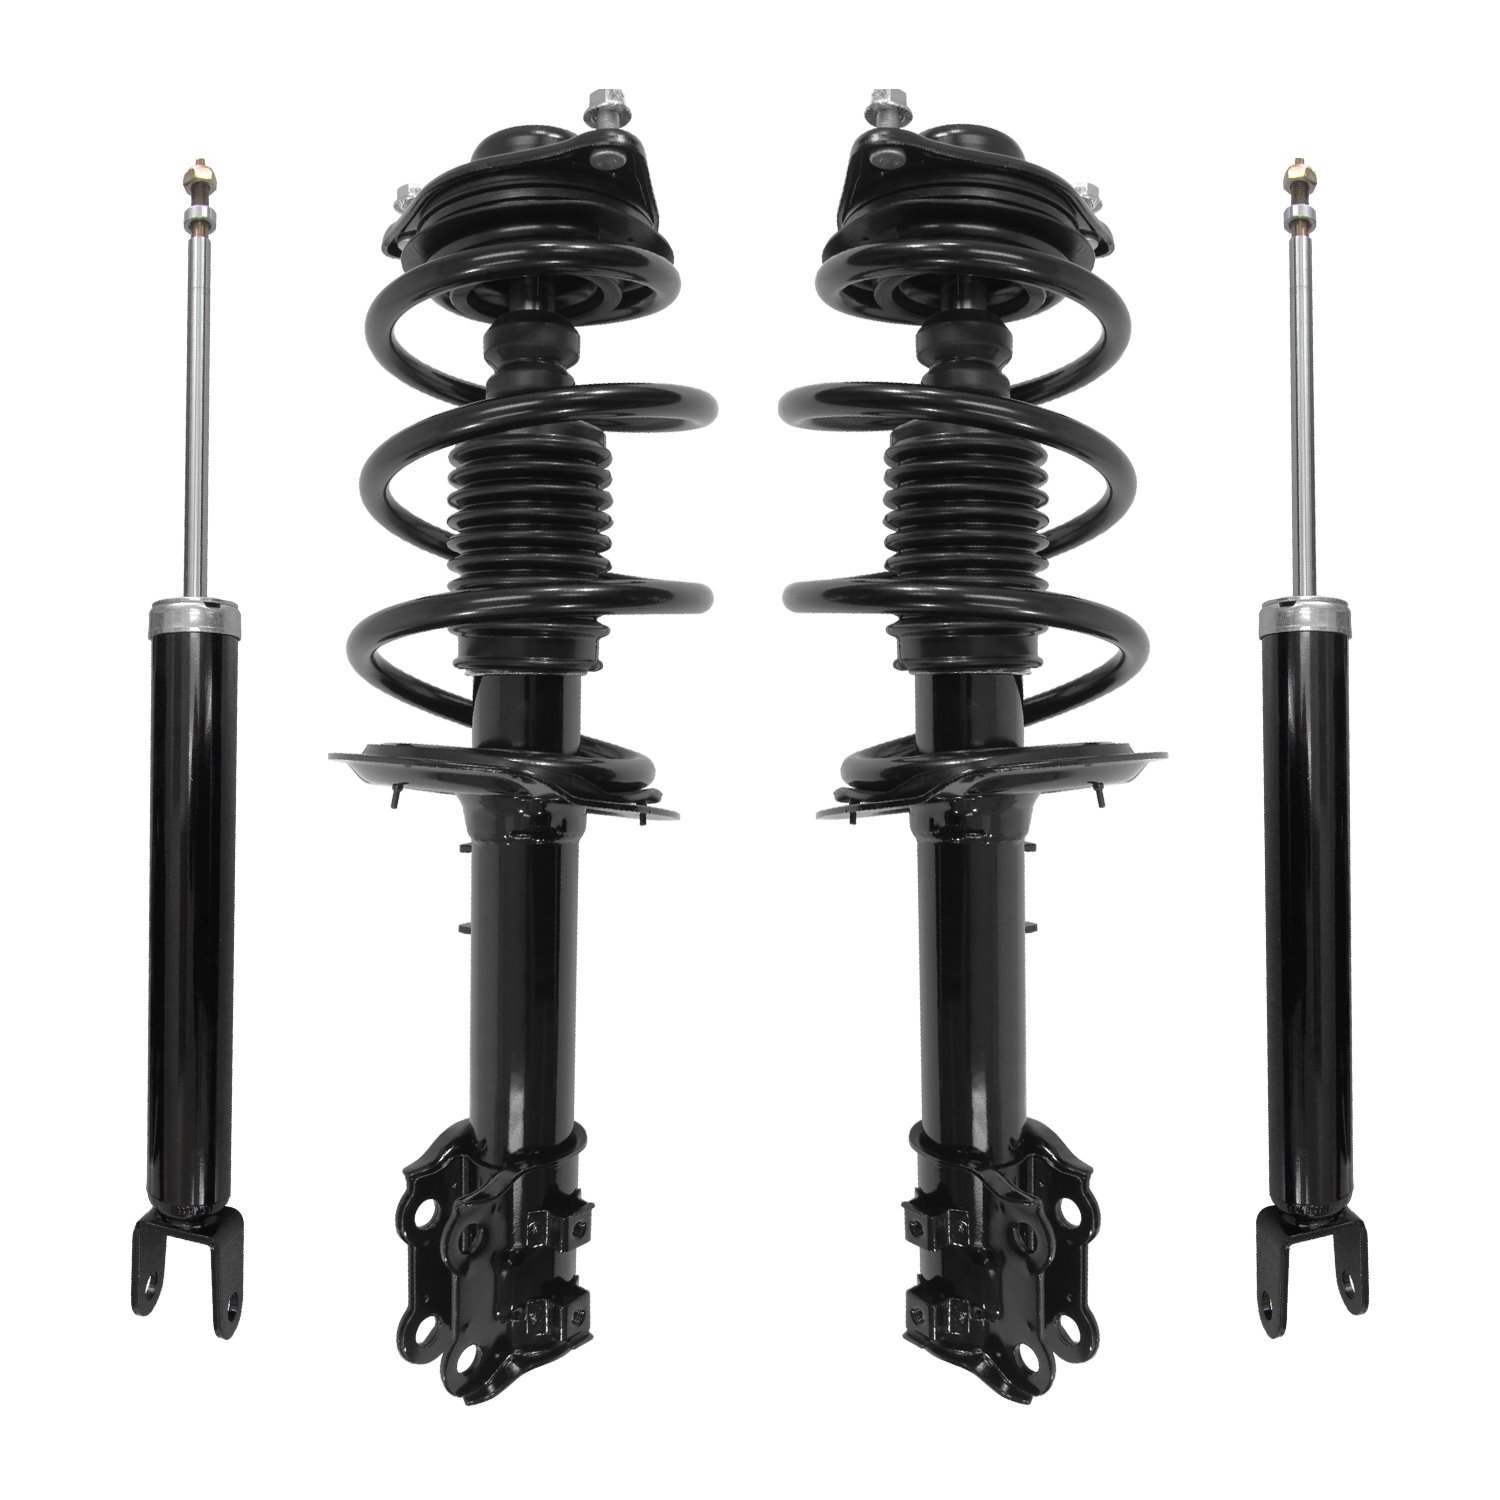 4-11793-259160-001 Front & Rear Suspension Strut & Coil Spring Assembly Fits Select Hyundai Sonata